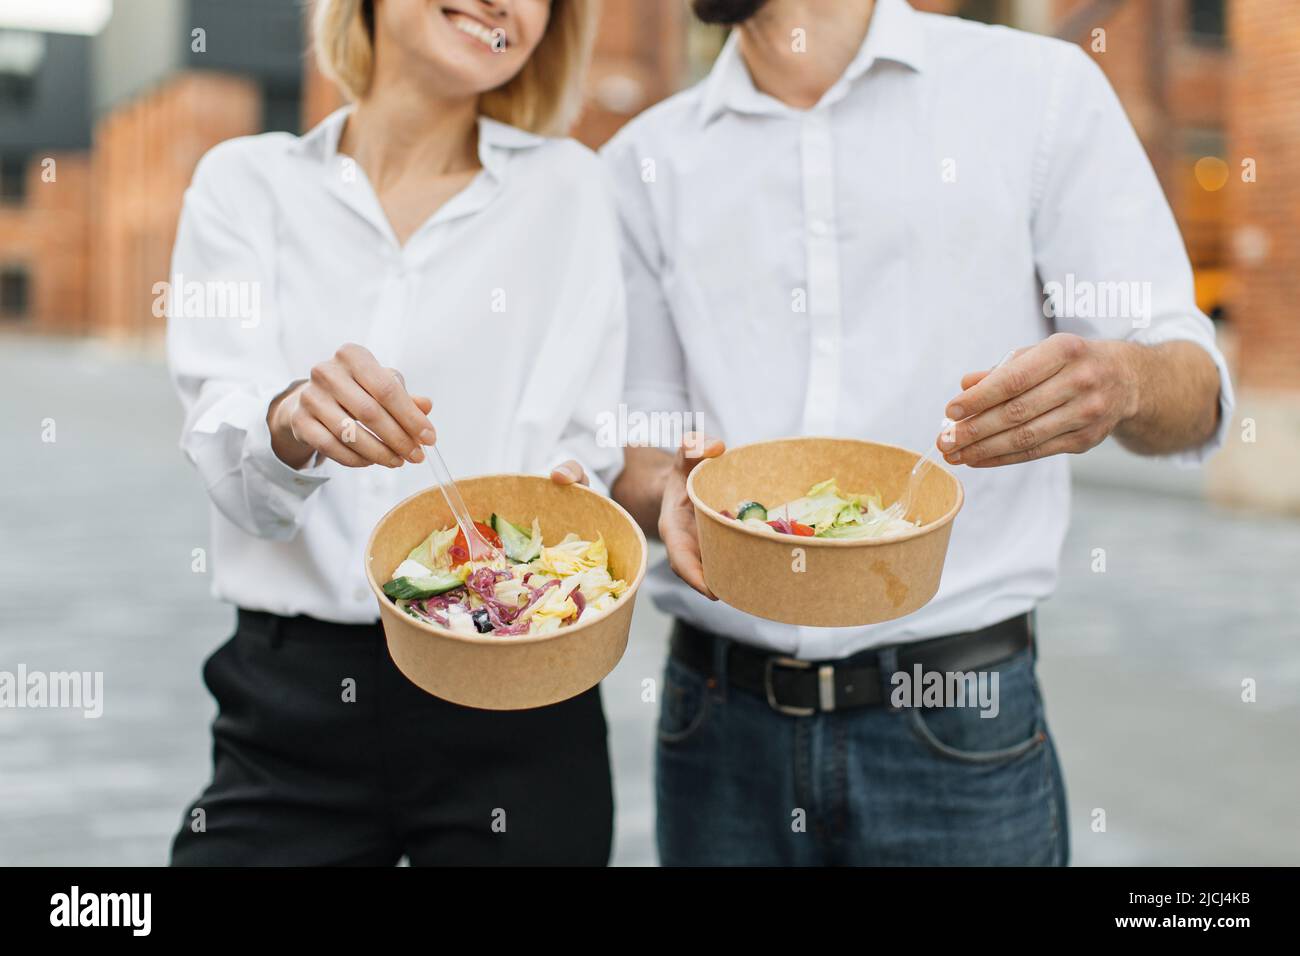 Cropped image of friends, business partners, caucasian man and woman with organic salad in cardboard bowl. Concept of healthy eating. Stock Photo